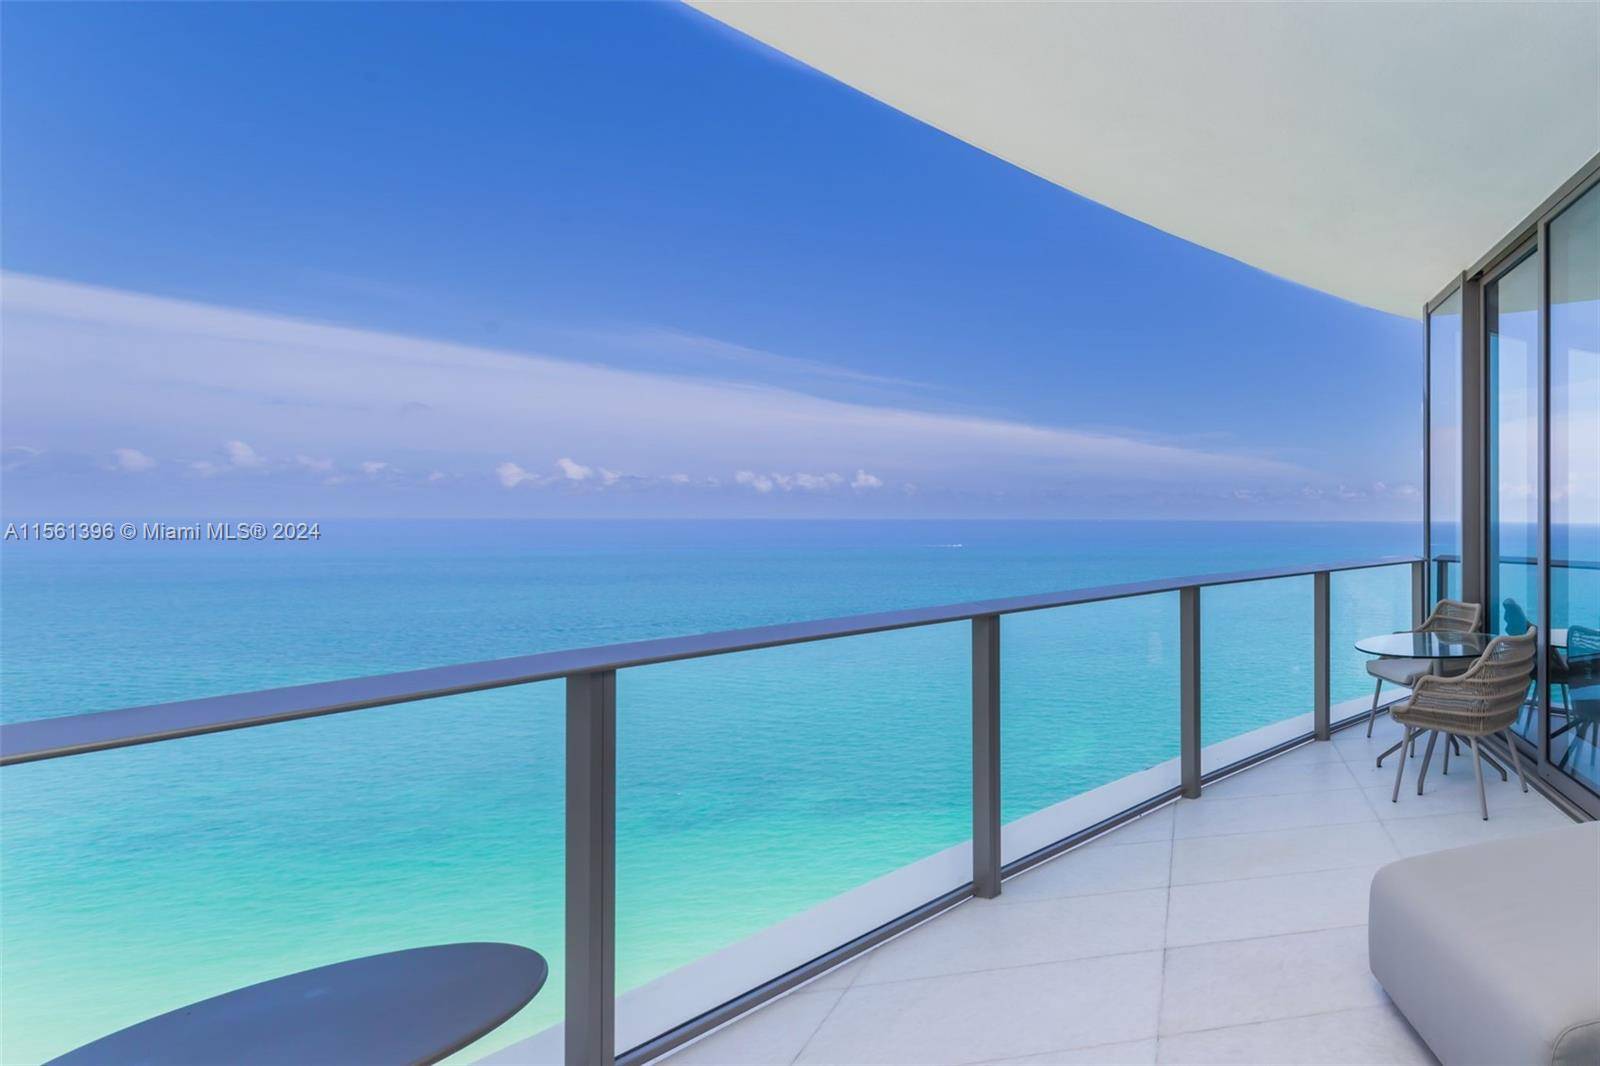 One of a kind Oceanfront Corner Residence with Two Primary Suites, Two Water Facing Terraces, Water Views from nearly every room, including an Ocean Facing Kitchen, and a Private Elevator ...